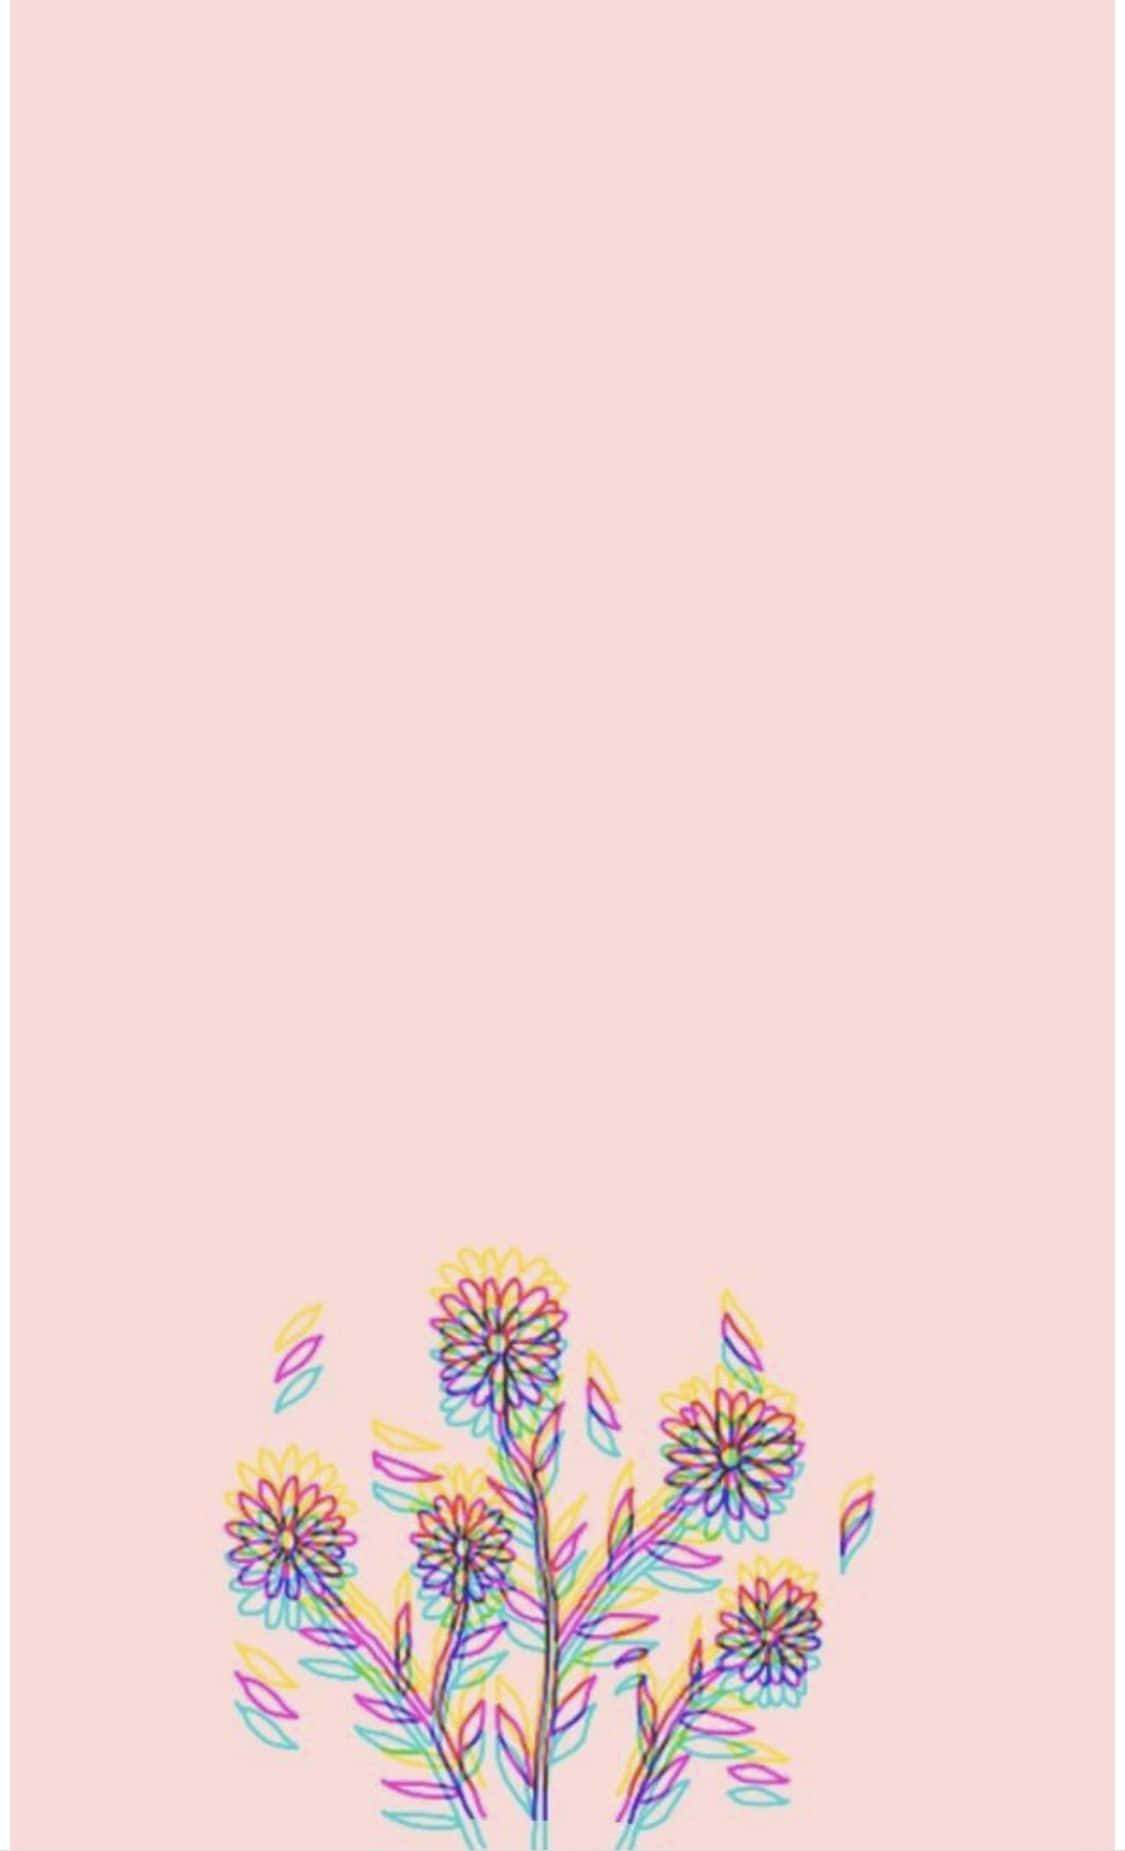 Aesthetic Pastel Blurry Flowers Background